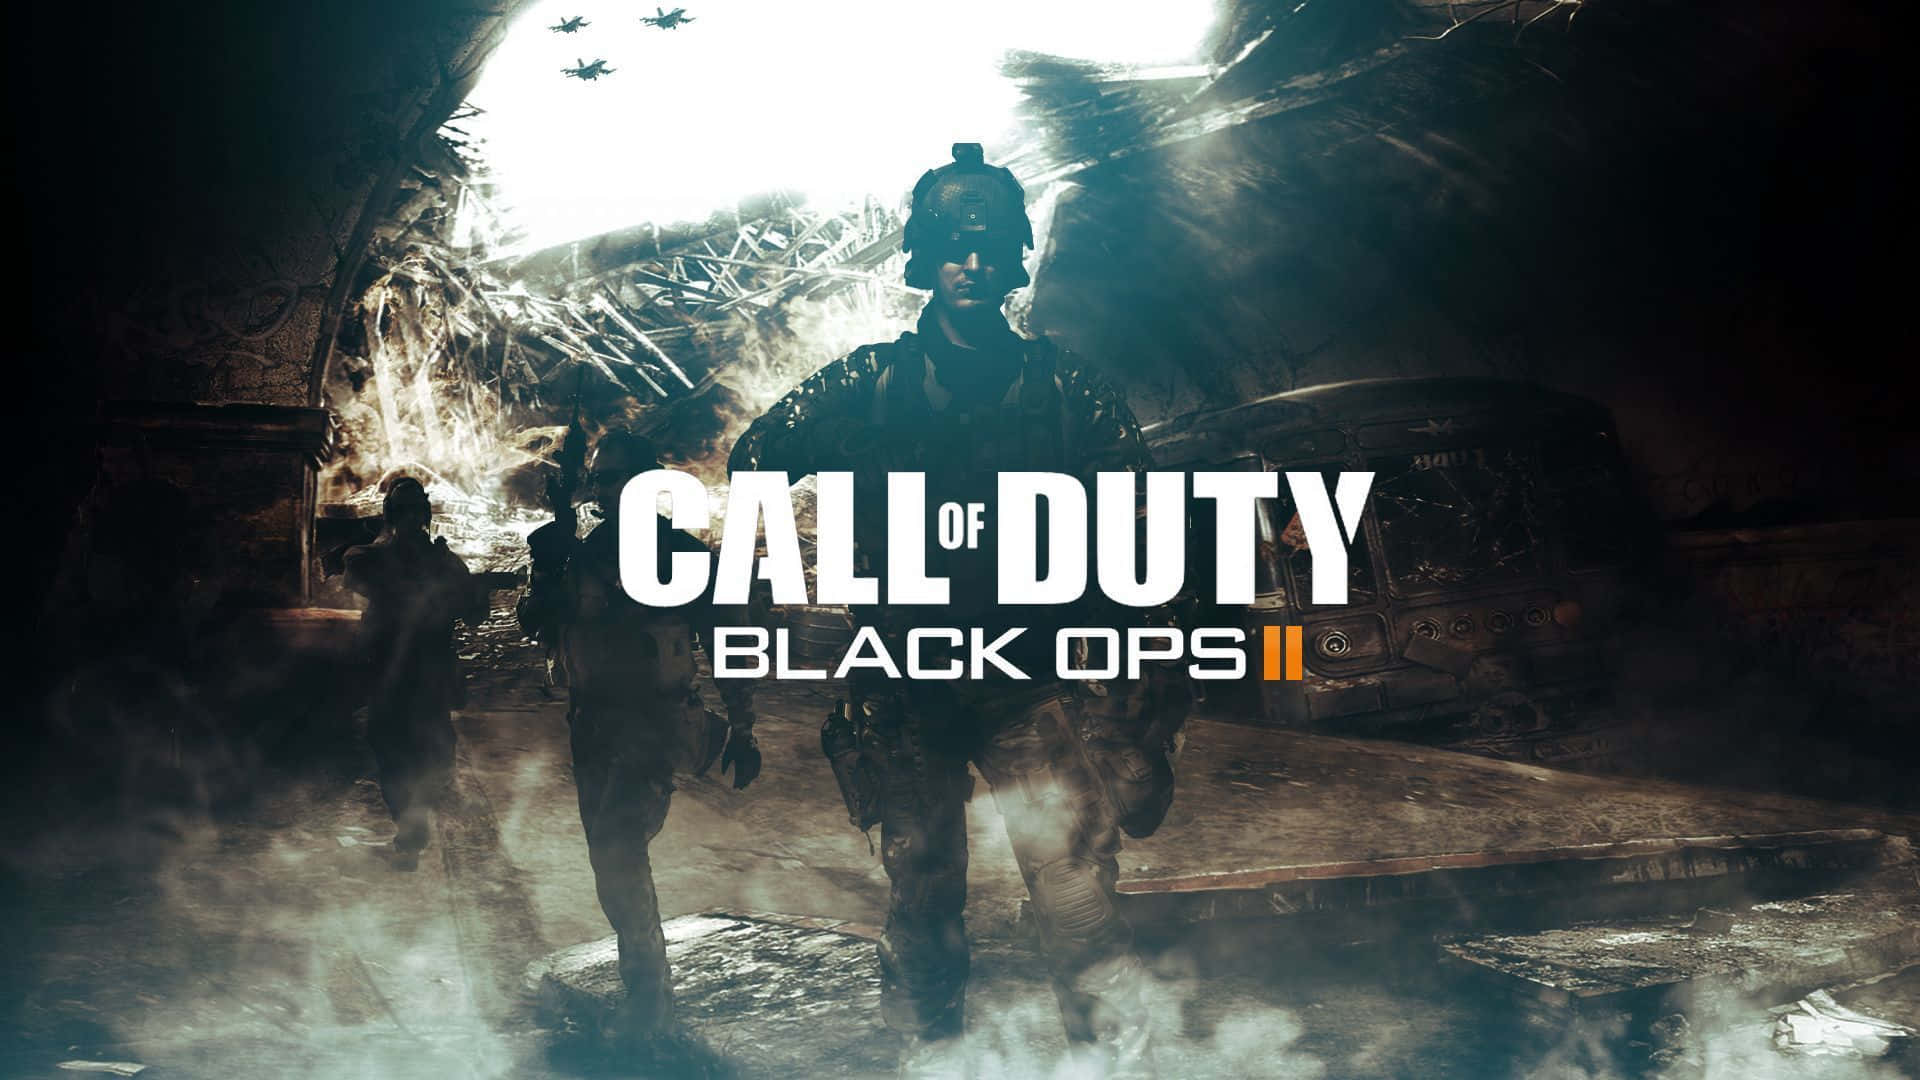 Join the fight against a fanatical enemy as Call of Duty: Black Ops arrives. Wallpaper